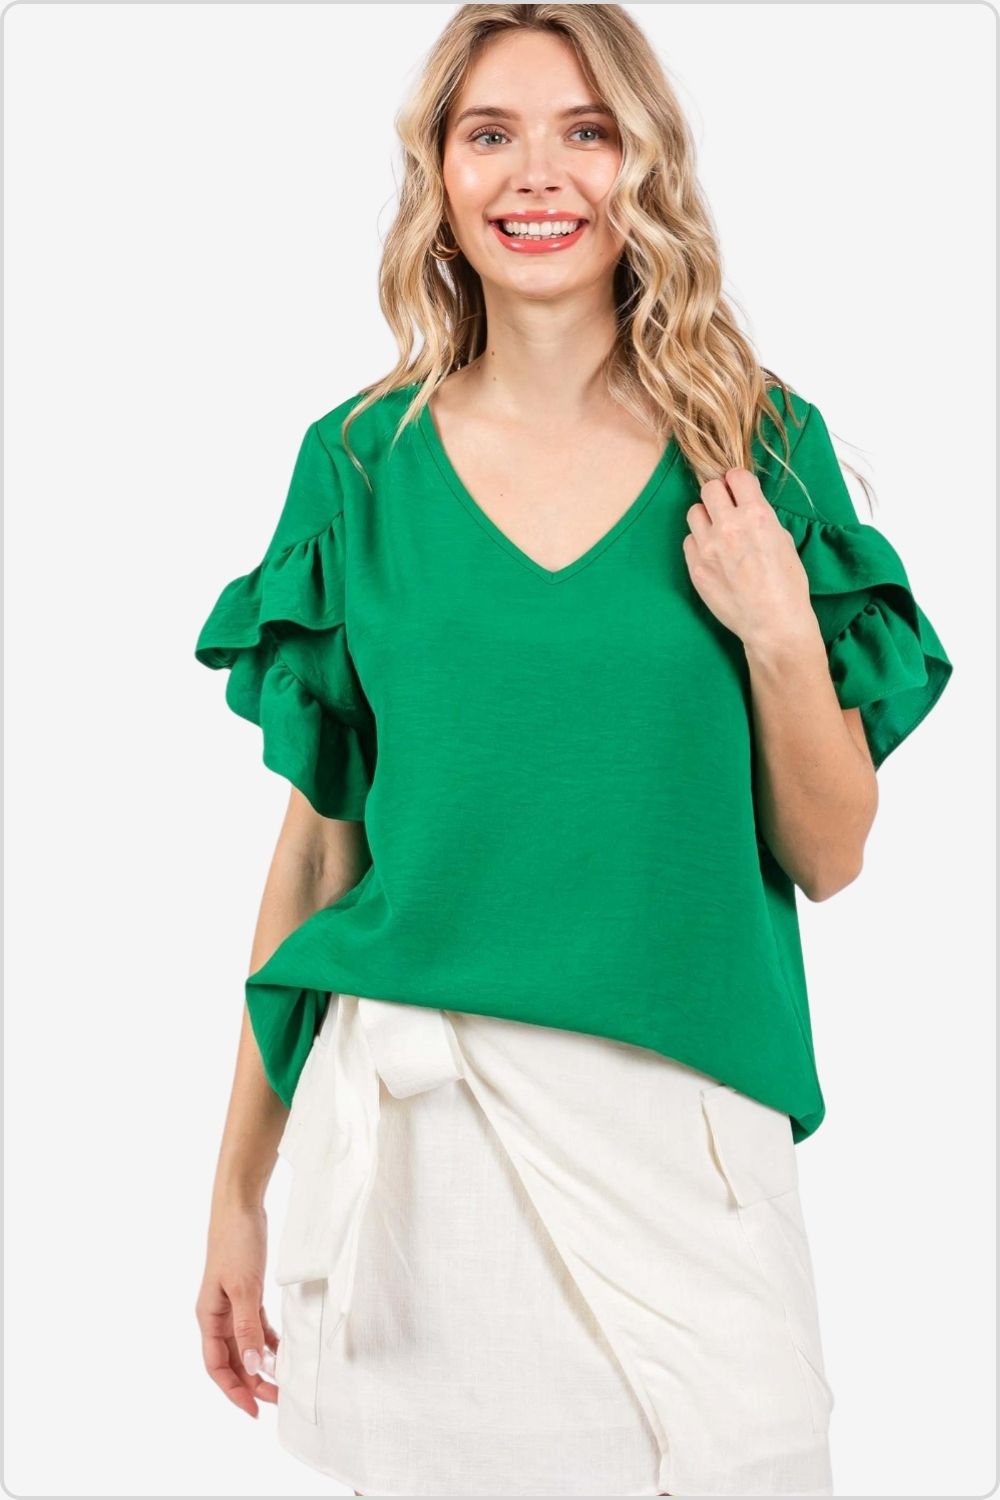 Chic Ruffled Short Sleeve V-Neck Blouse, perfect for upgrading any outfit